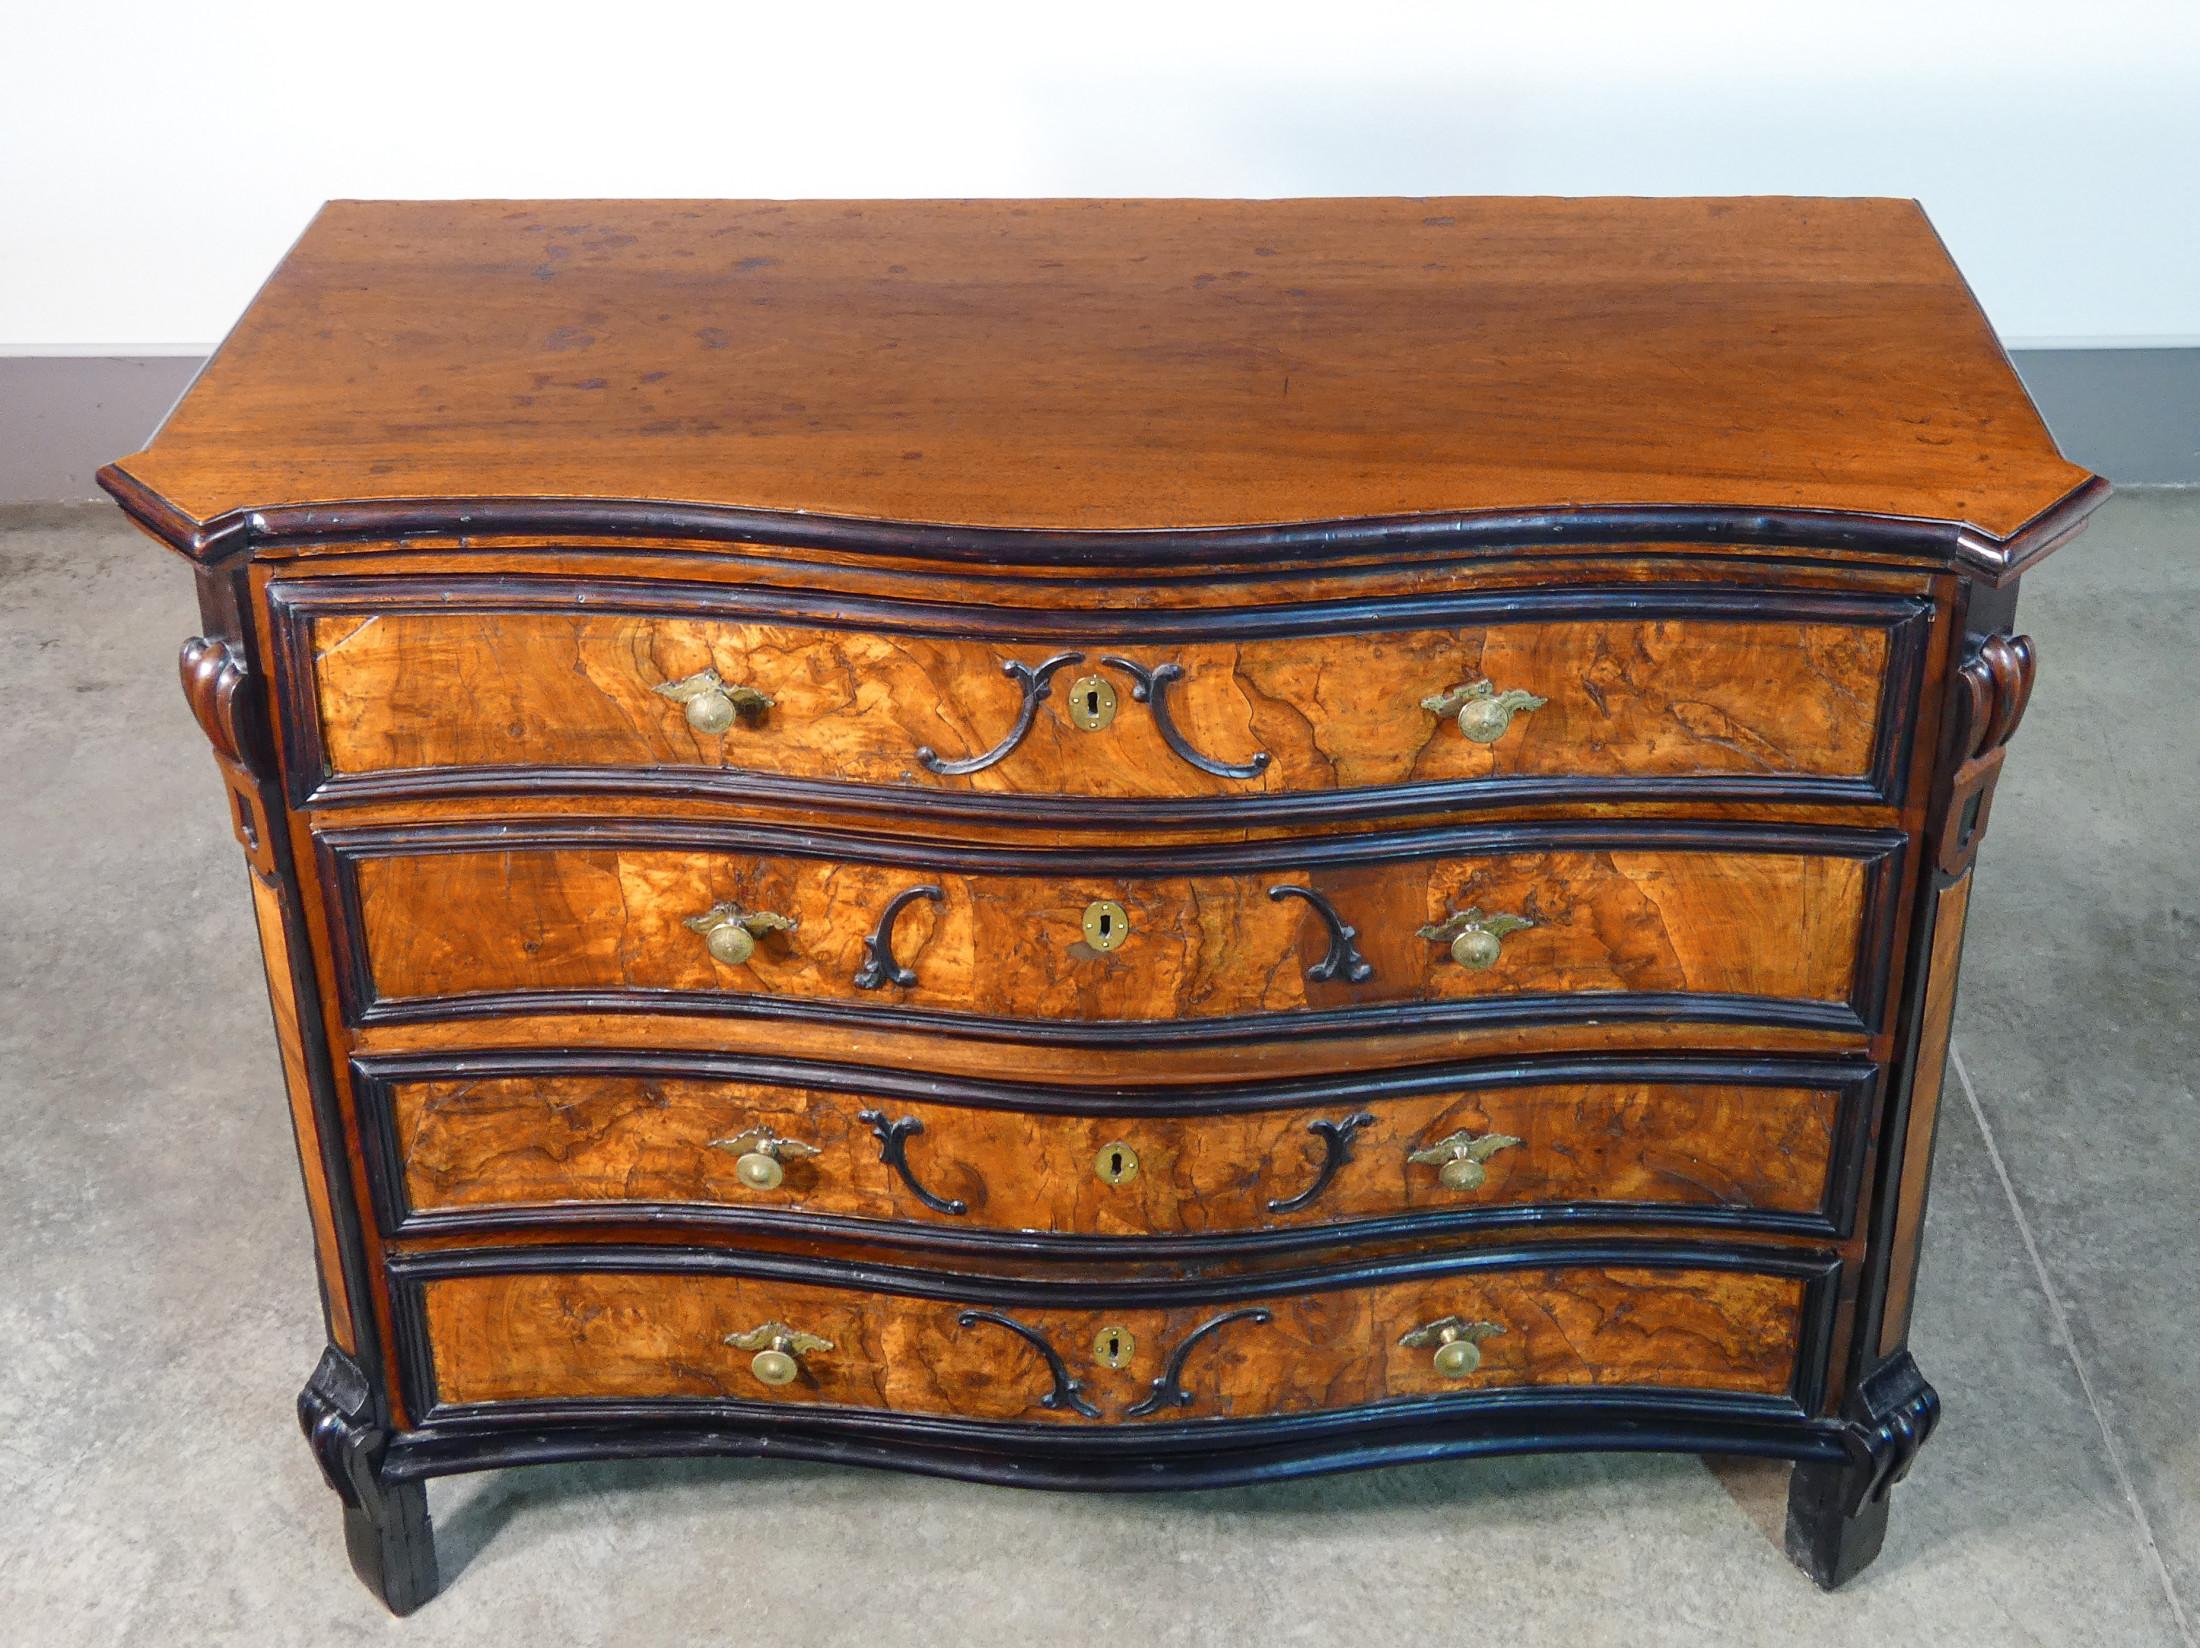 19th Century Original Louis XIV Chest of Drawers Walnut Wood and Briar Italy, Early 18th C. For Sale